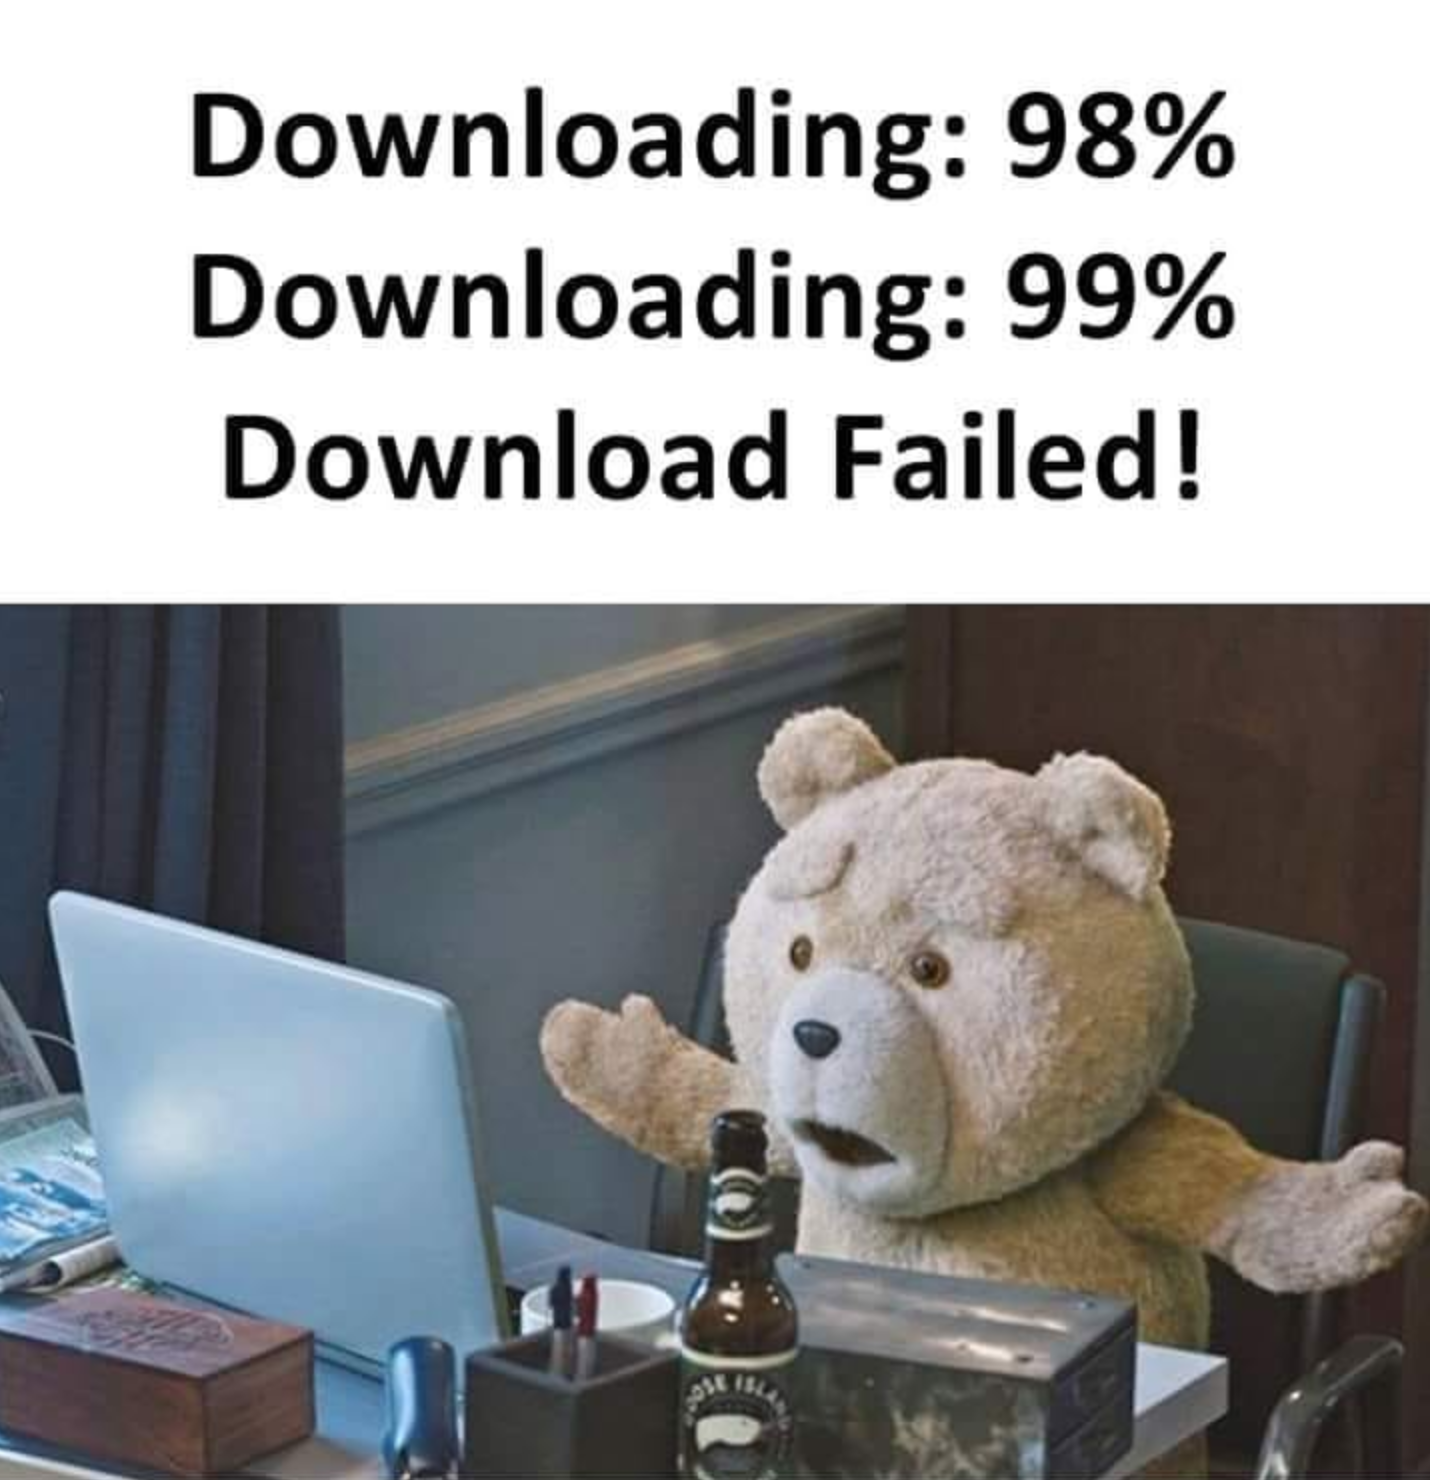 gaming memes and pics - comedy teddy bear - Downloading 98% Downloading 99% Download Failed!